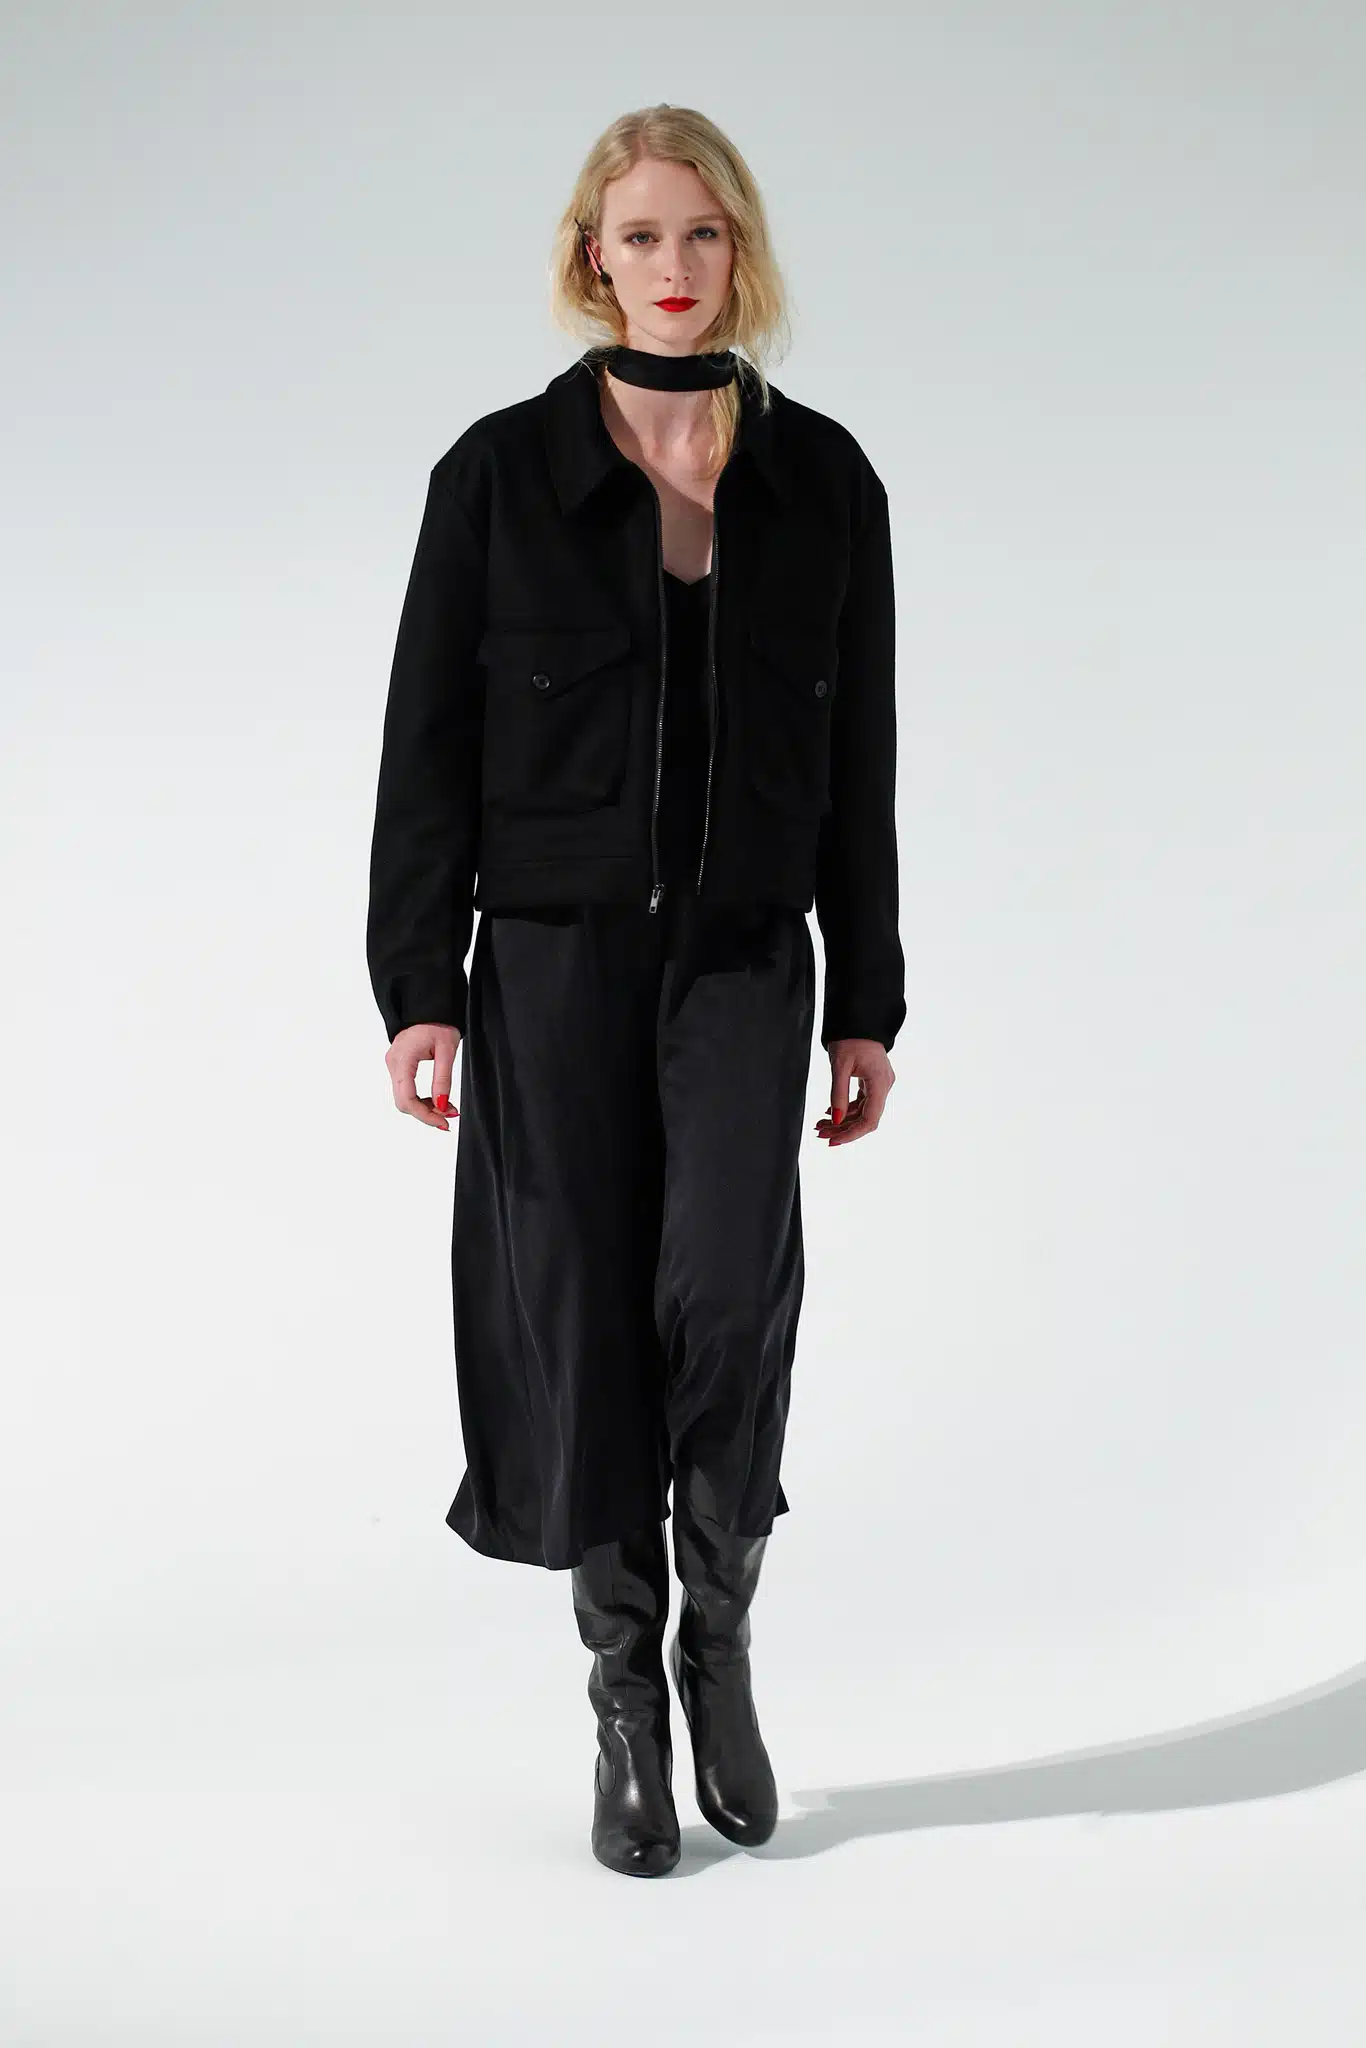 Image from FW15 SHOW Collection